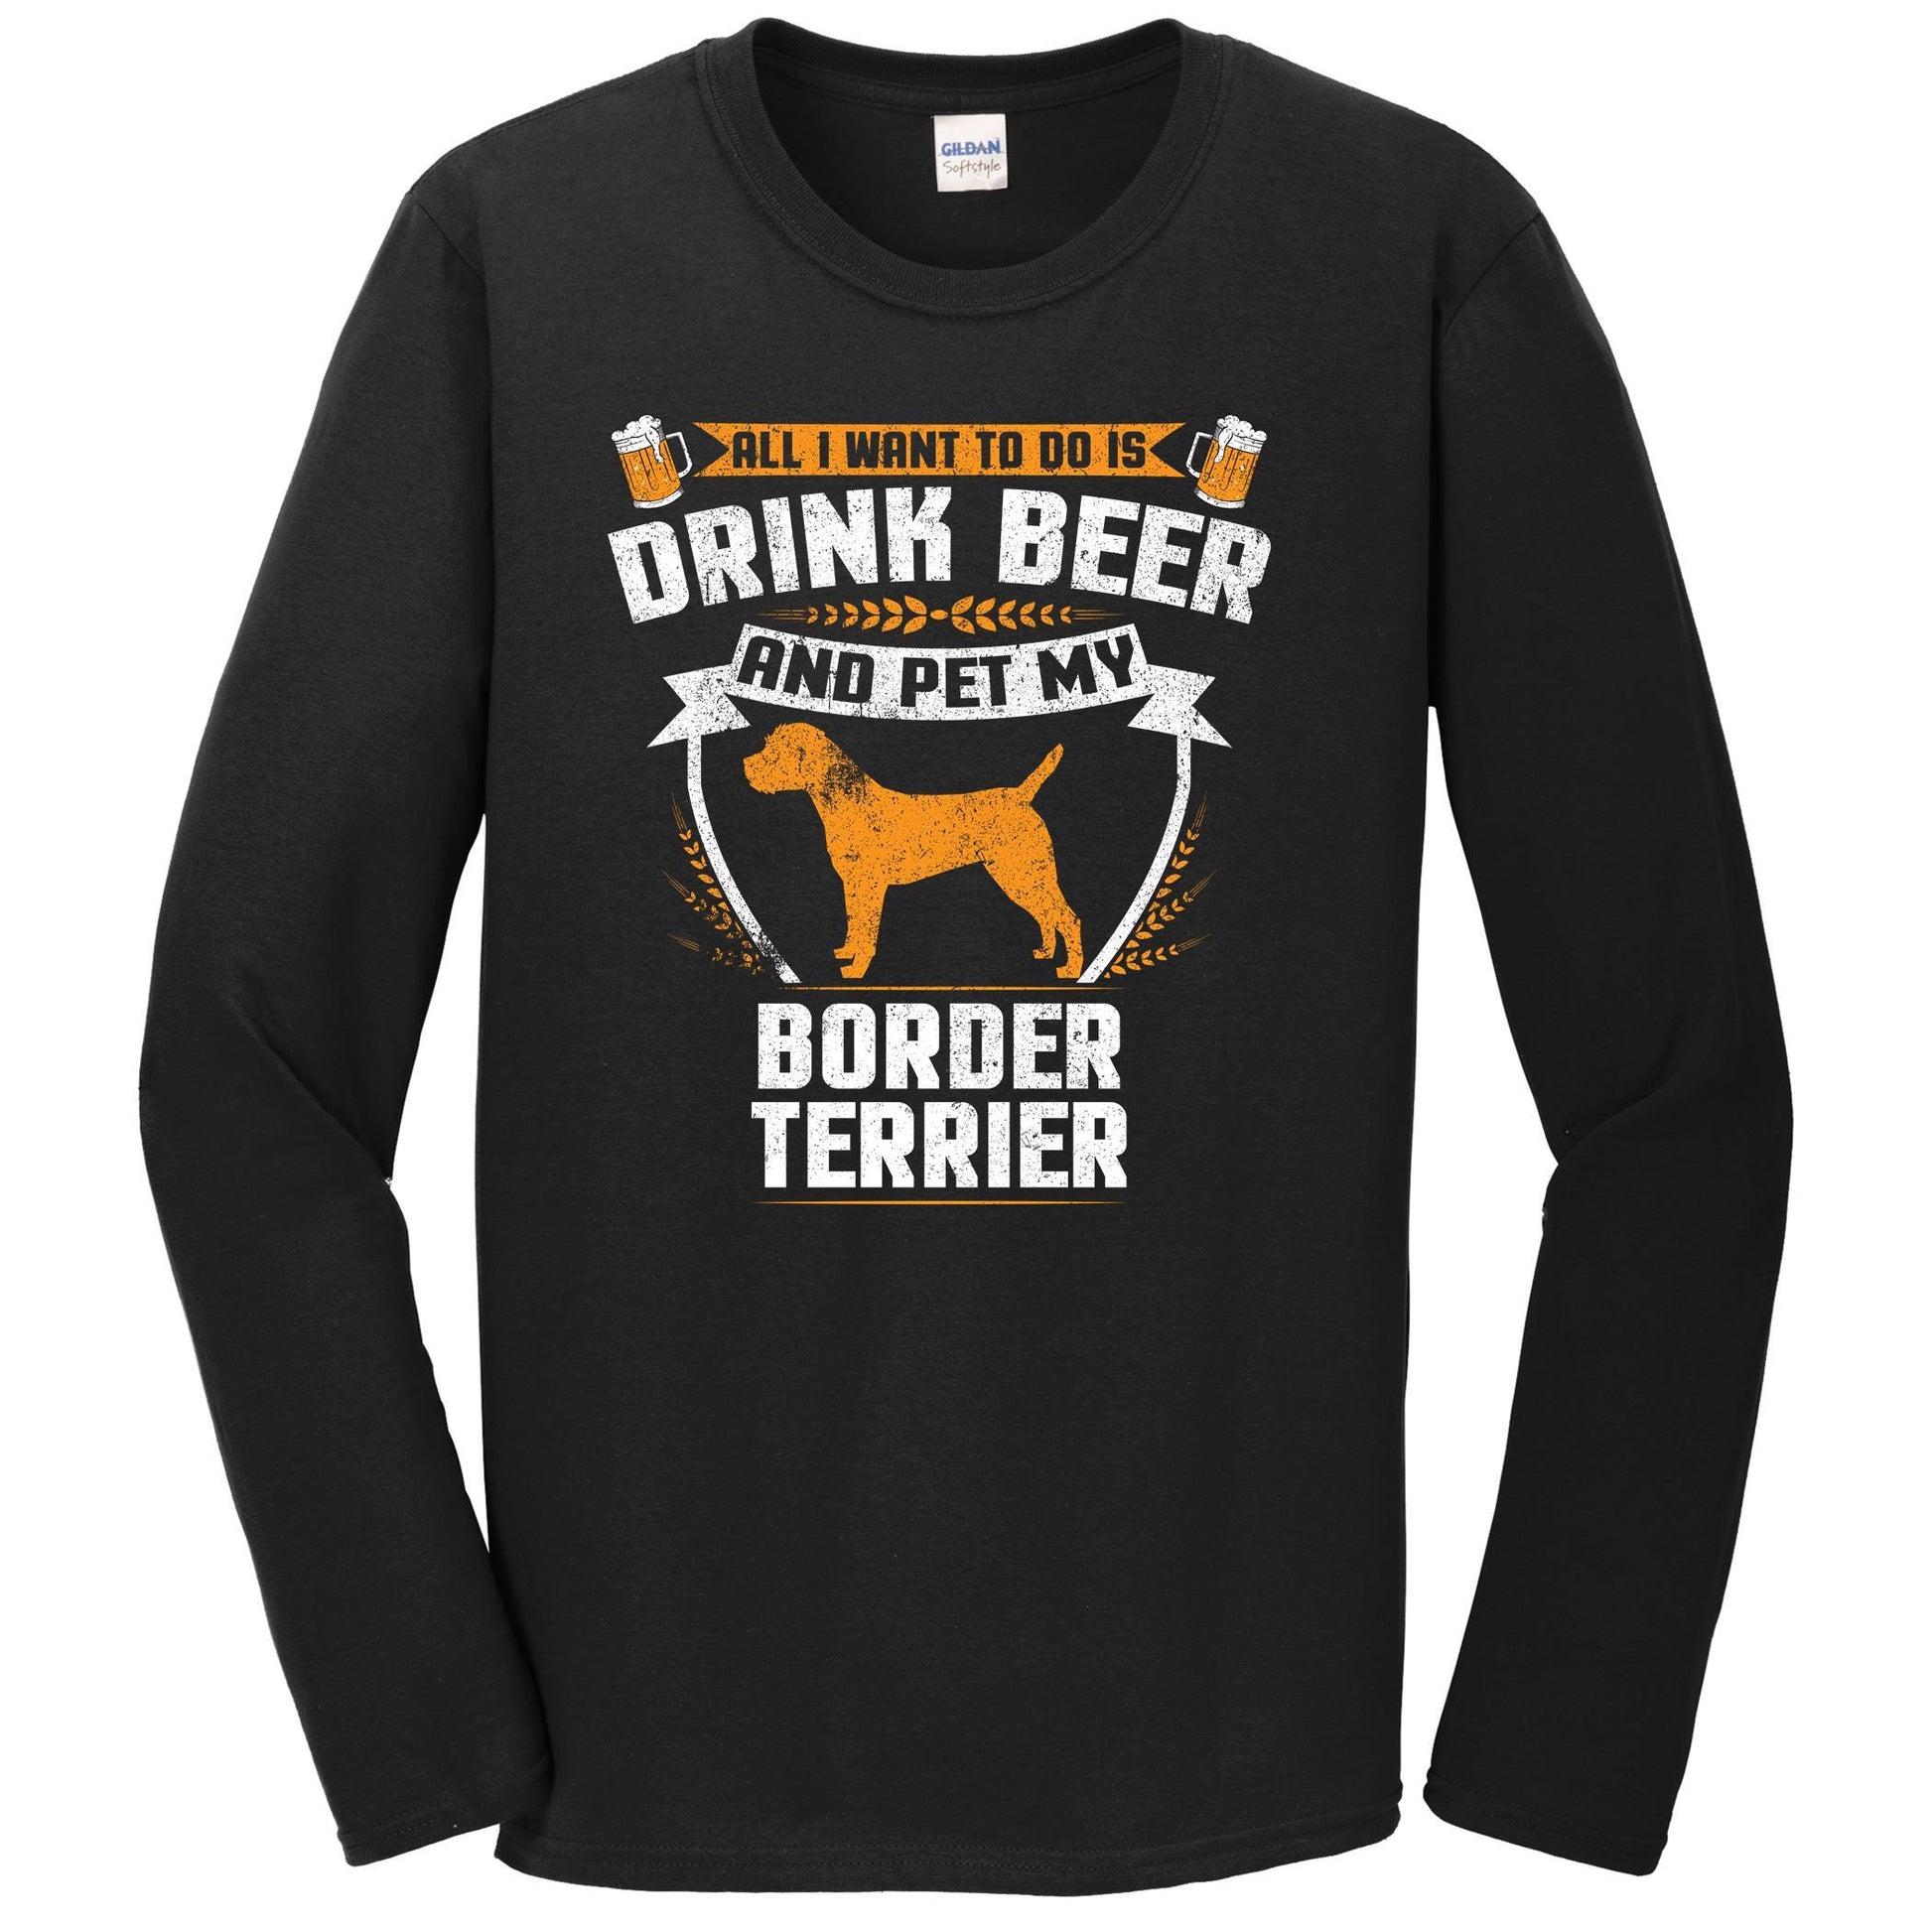 All I Want To Do Is Drink Beer And Pet My Border Terrier Funny Dog Owner Long Sleeve Shirt